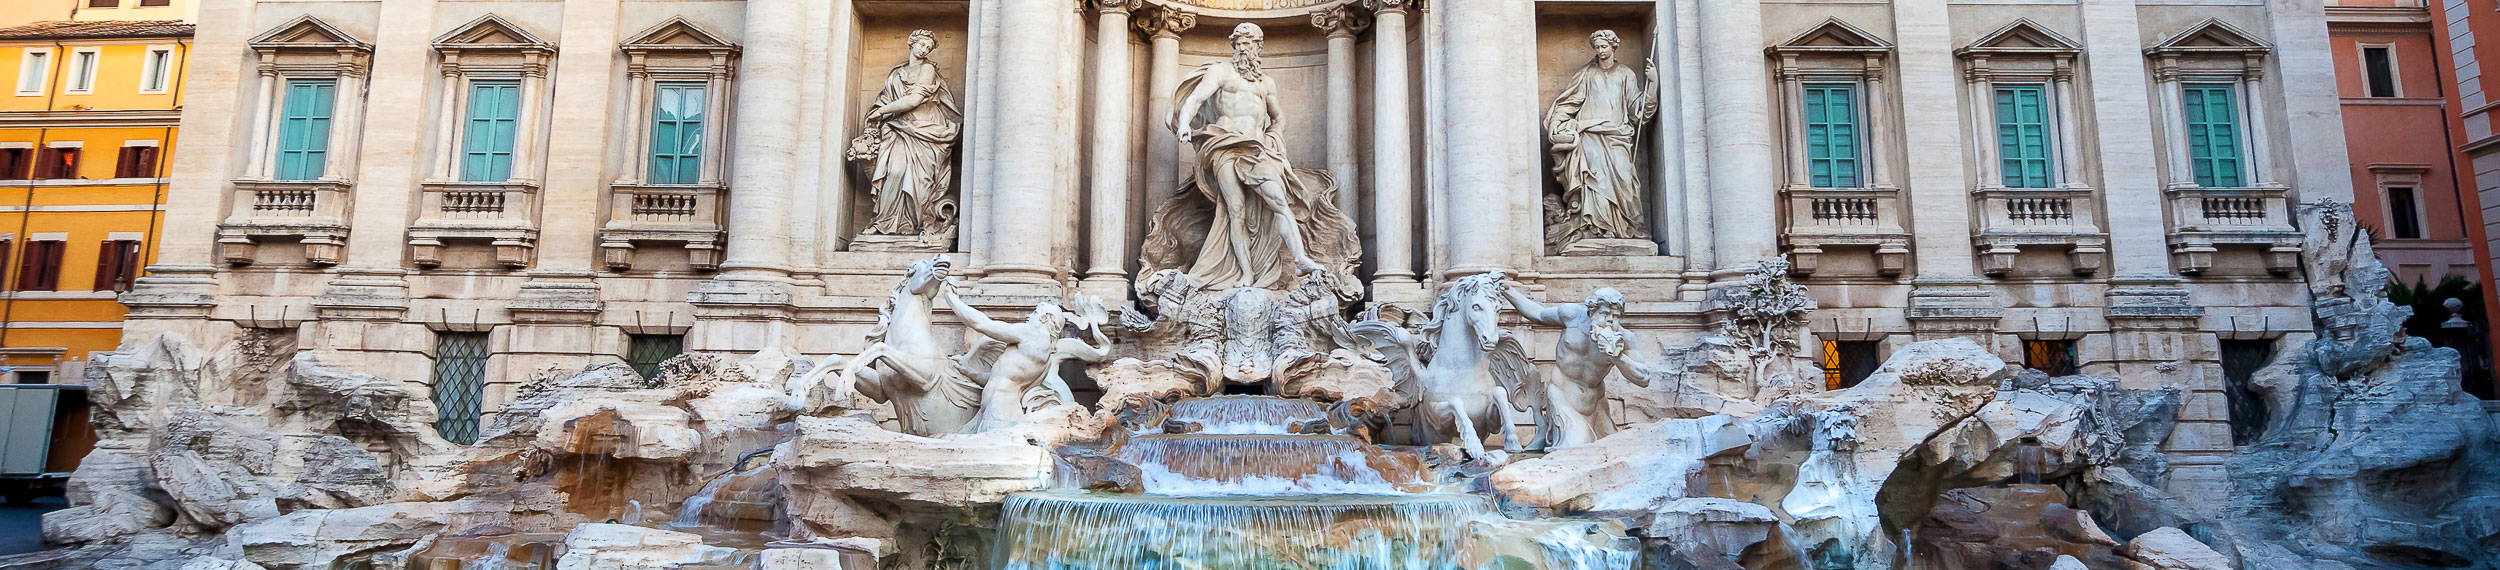 The Trevi Fountain in Rome, Italy. 